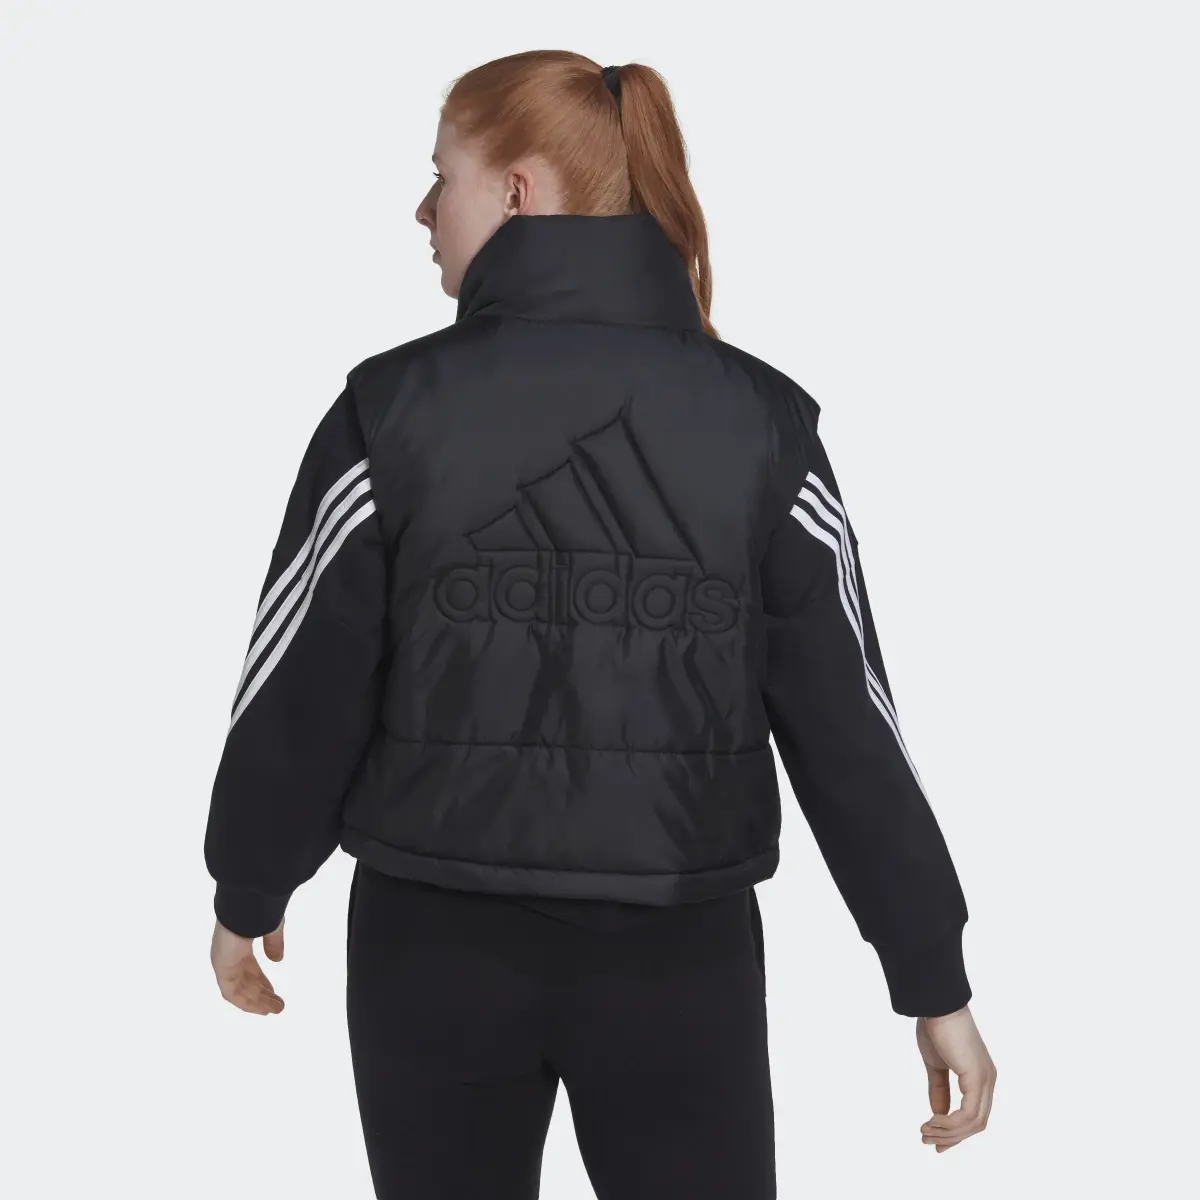 Adidas 3-Stripes Insulated Vest. 3